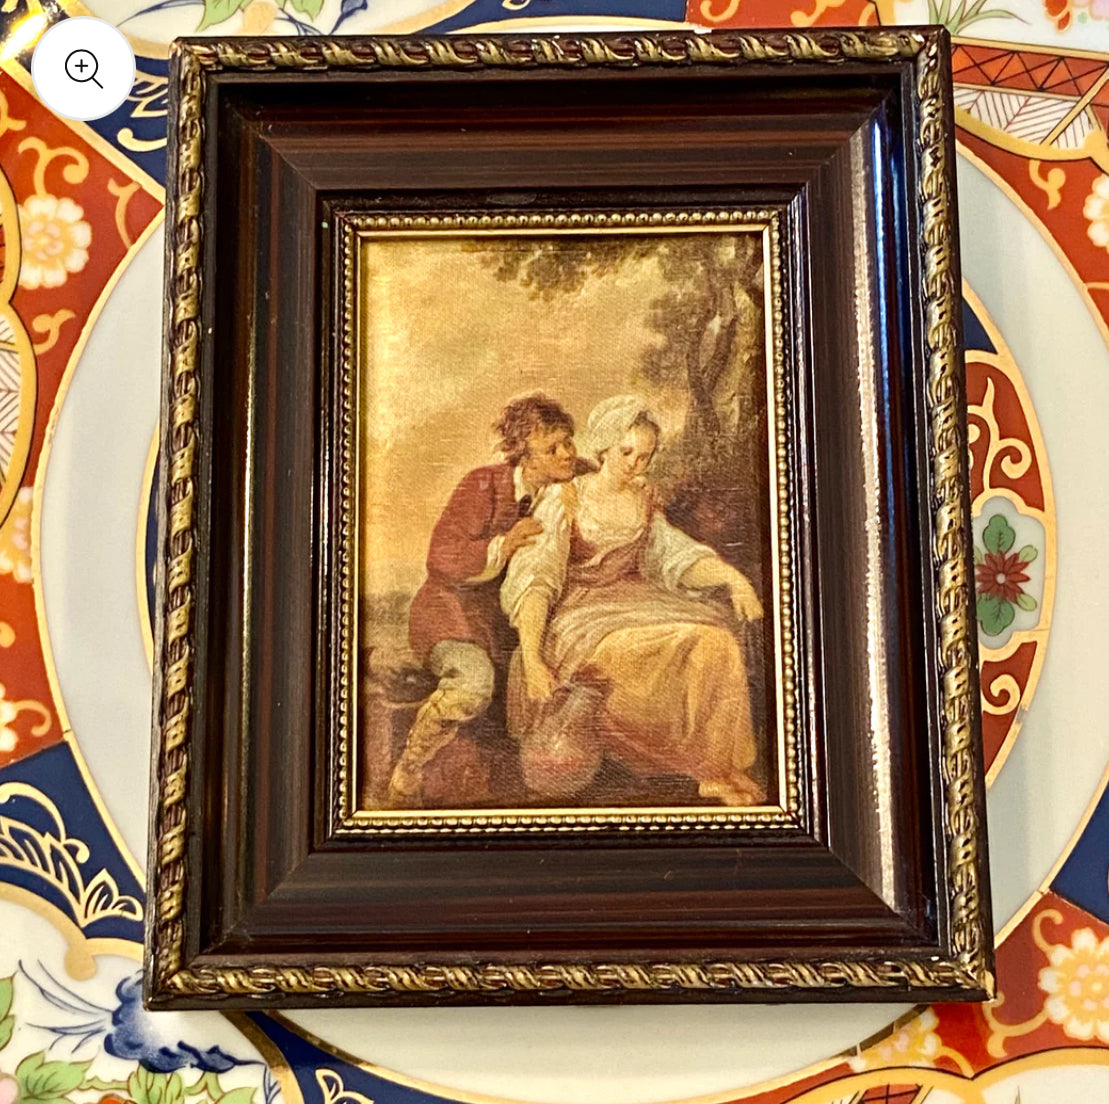 Lovely set of 2 vintage portraits in rich wood and gold gilt frames wall art